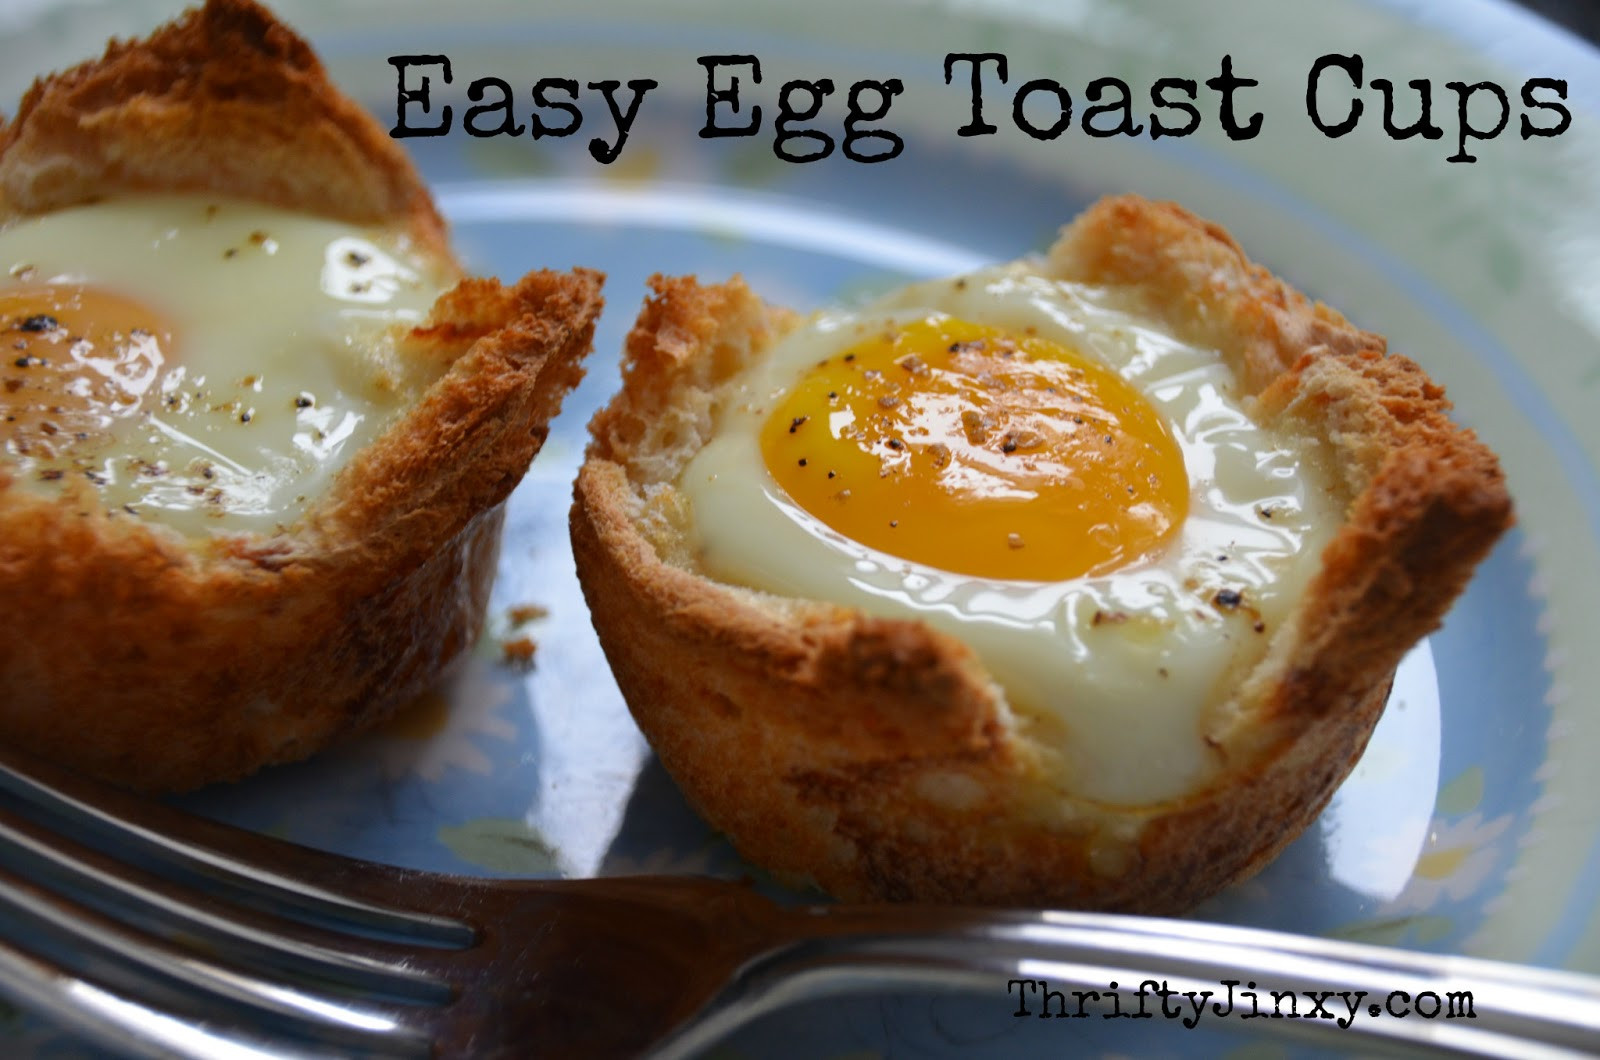 Easy Breakfast Recipes With Eggs
 Breakfast Recipe Easy Egg and Toast Cups Thrifty Jinxy